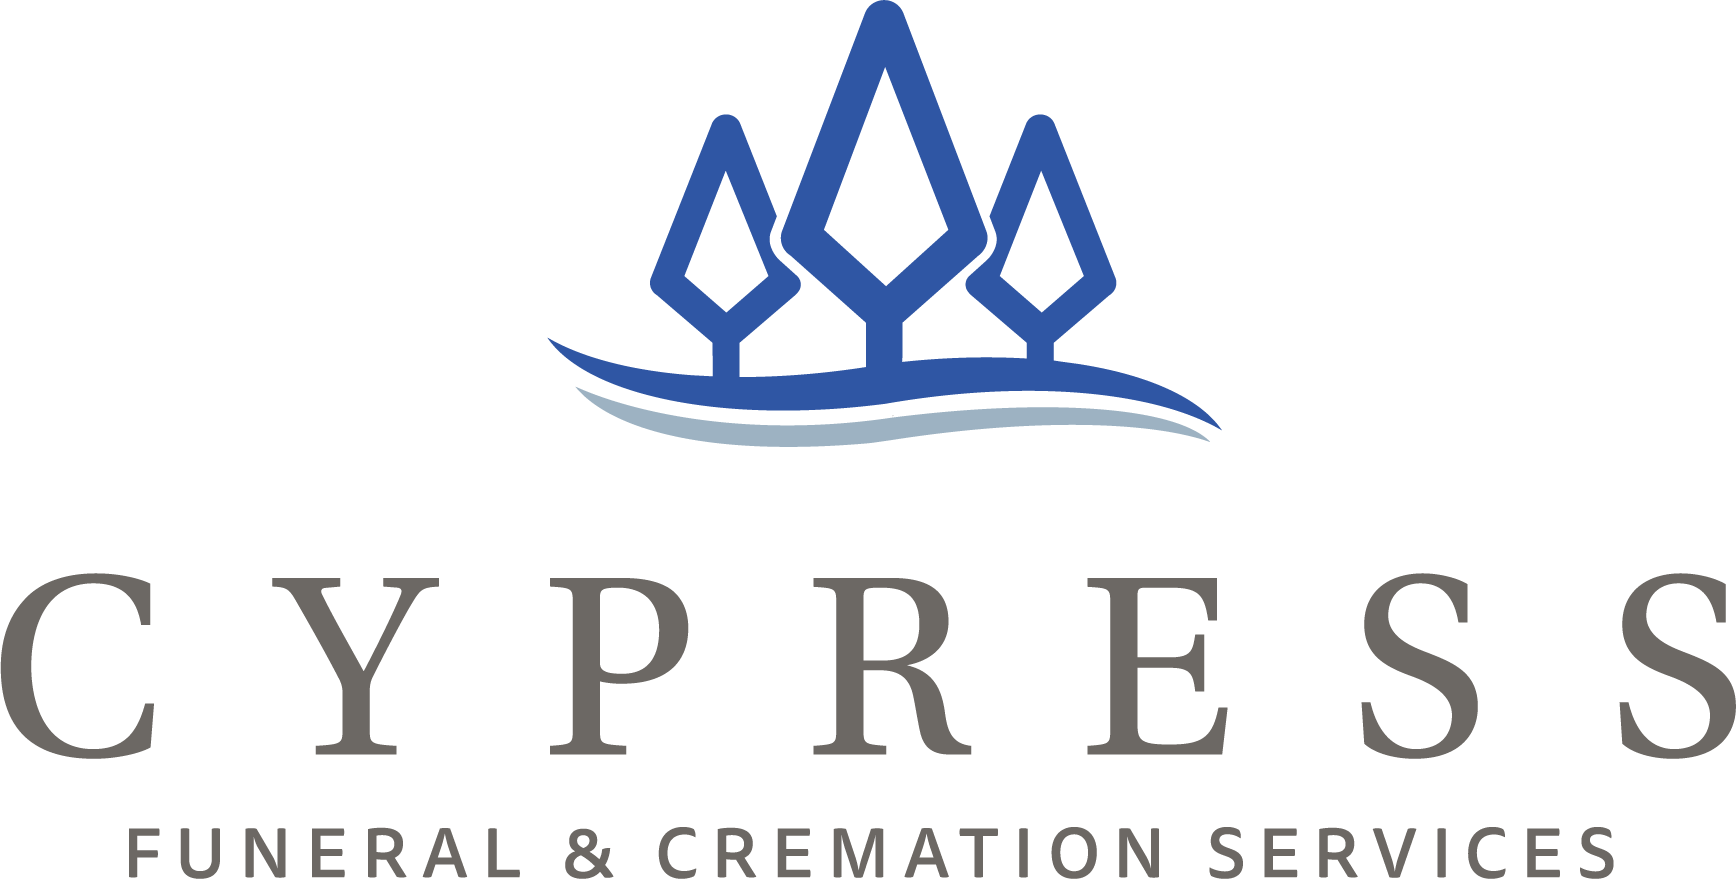 Cypress Funeral & Cremation Services